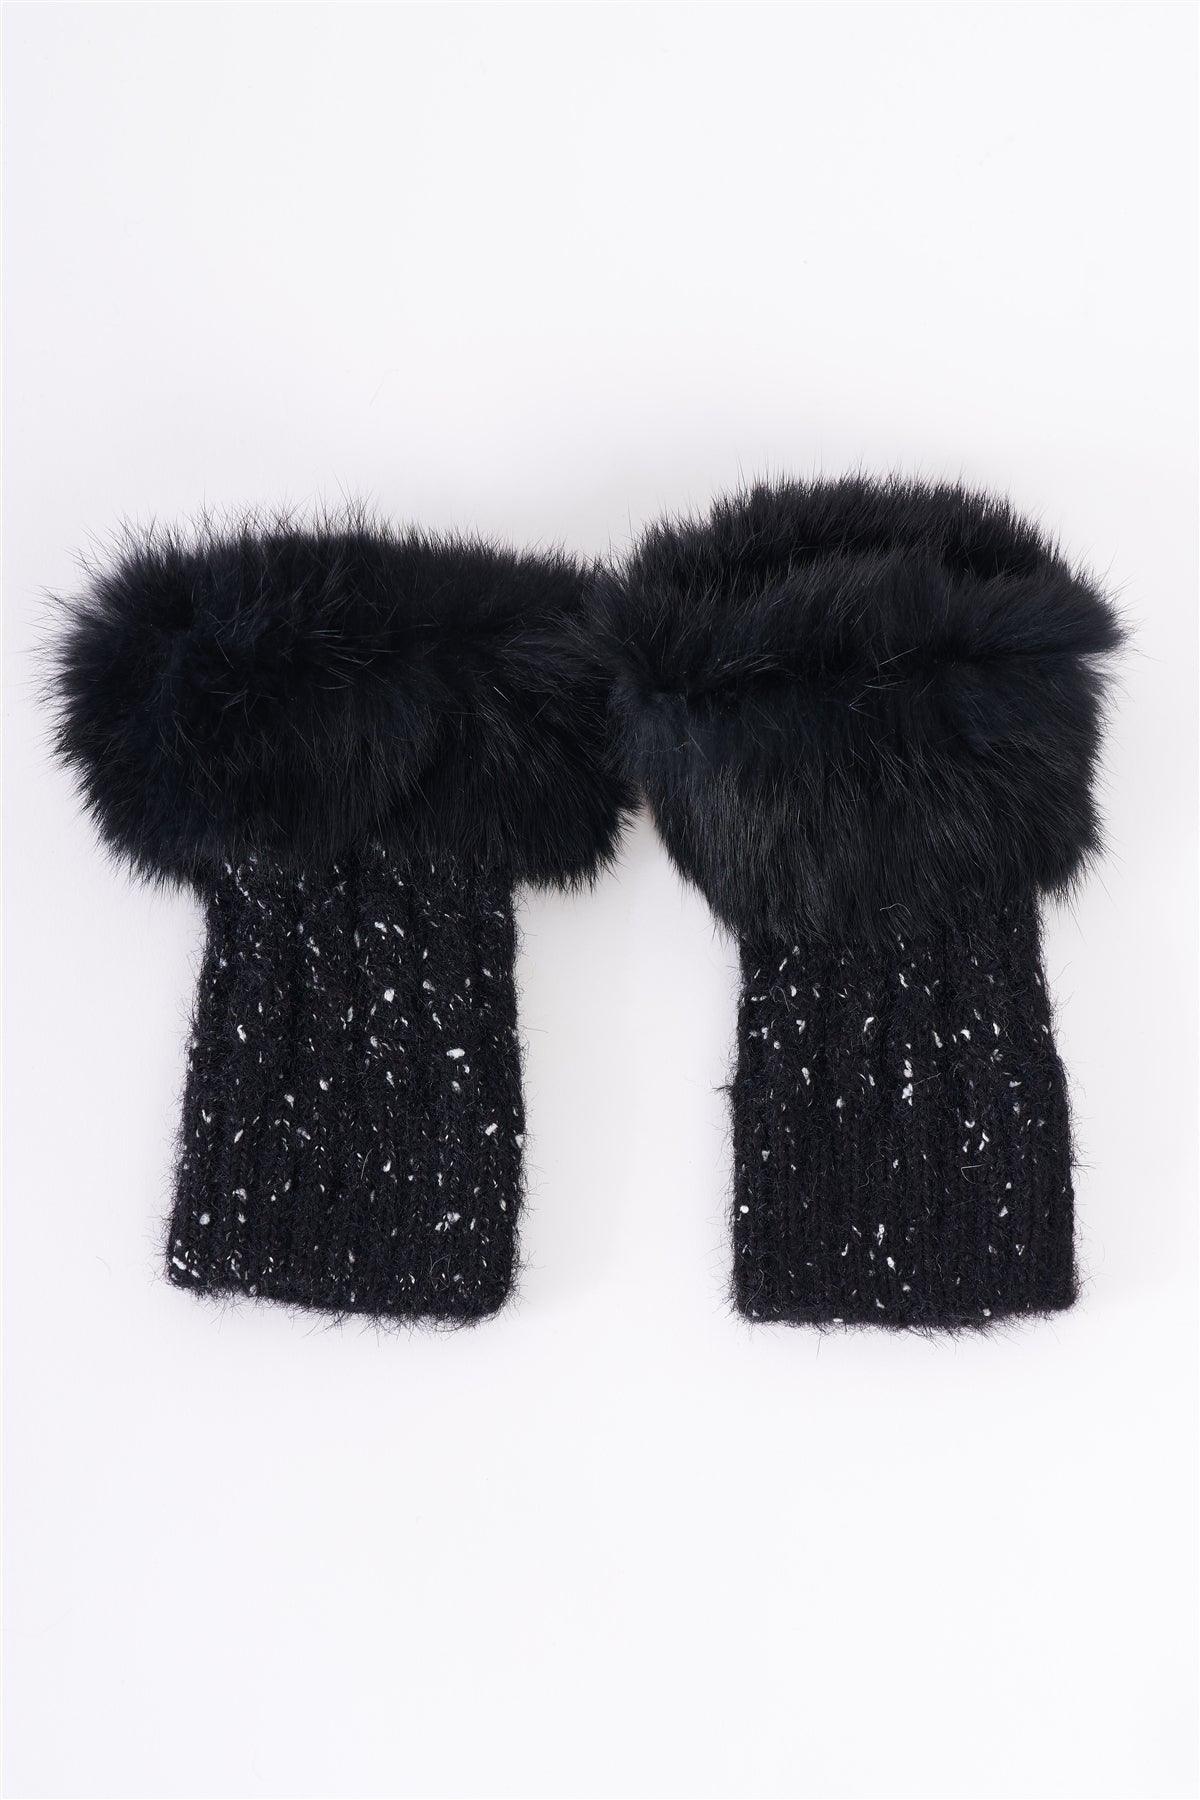 Black Woven Furry Fingerless Two-Way Winter Gloves /3 Pieces